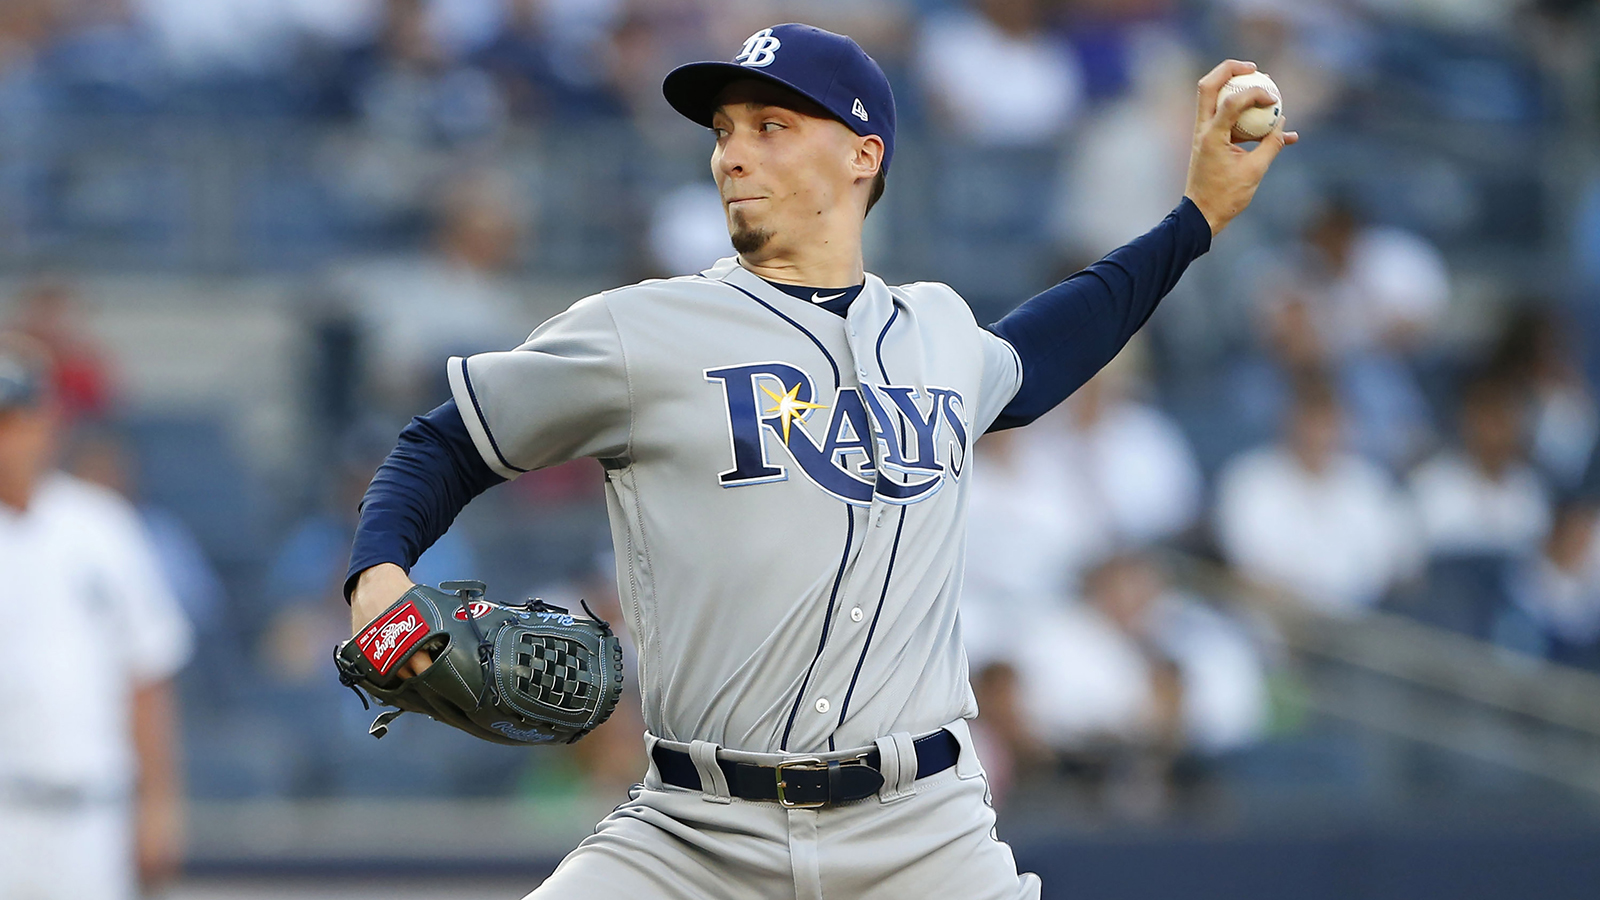 Blake Snell has win streak snapped as Rays drop opener to Yankees